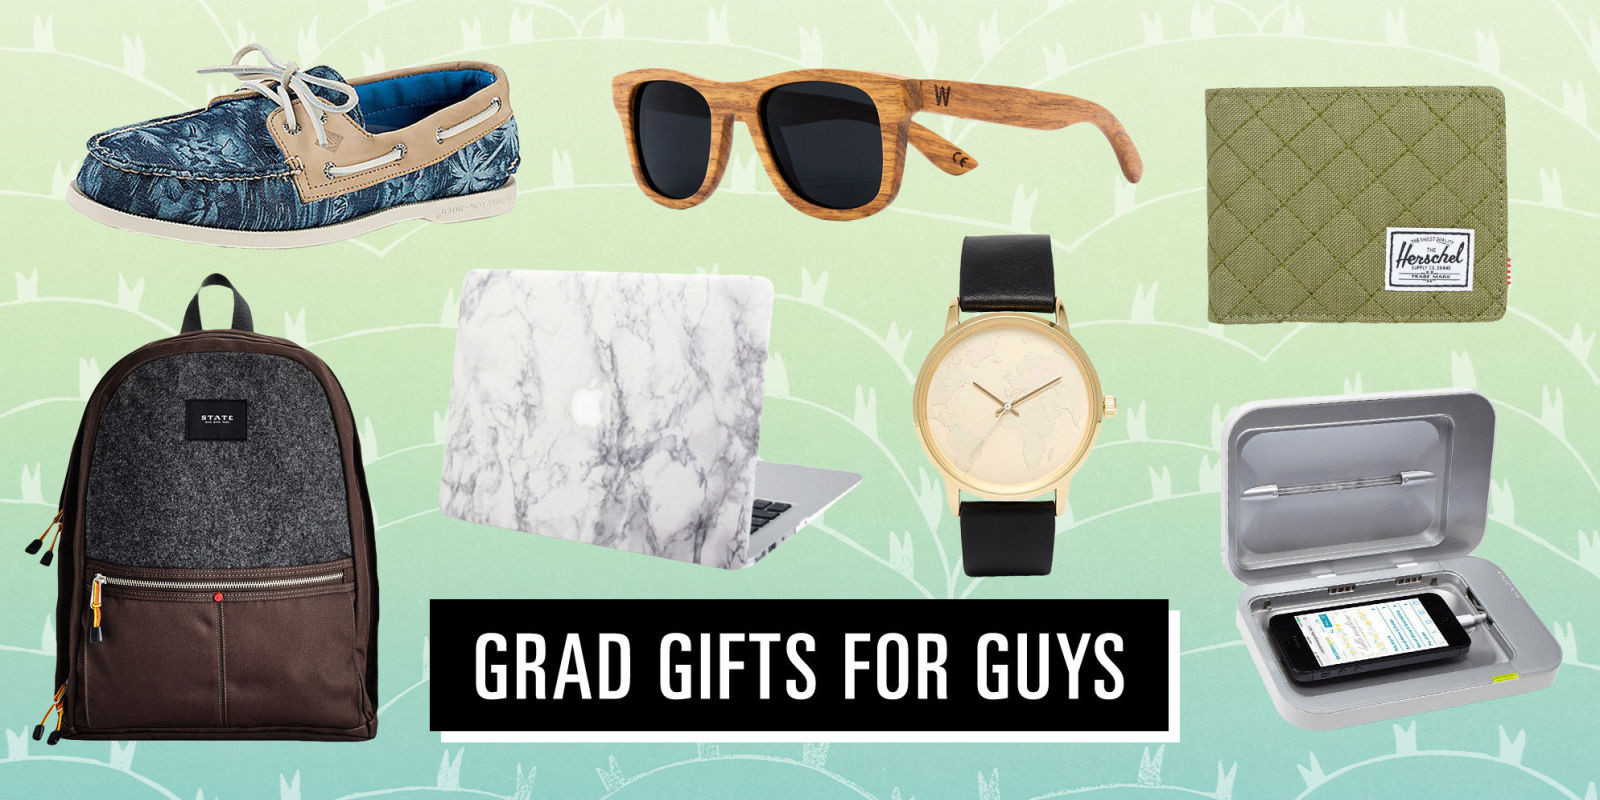 Guy Graduation Gift Ideas
 12 Graduation Gifts For Him Graduation Gift Ideas For Guys